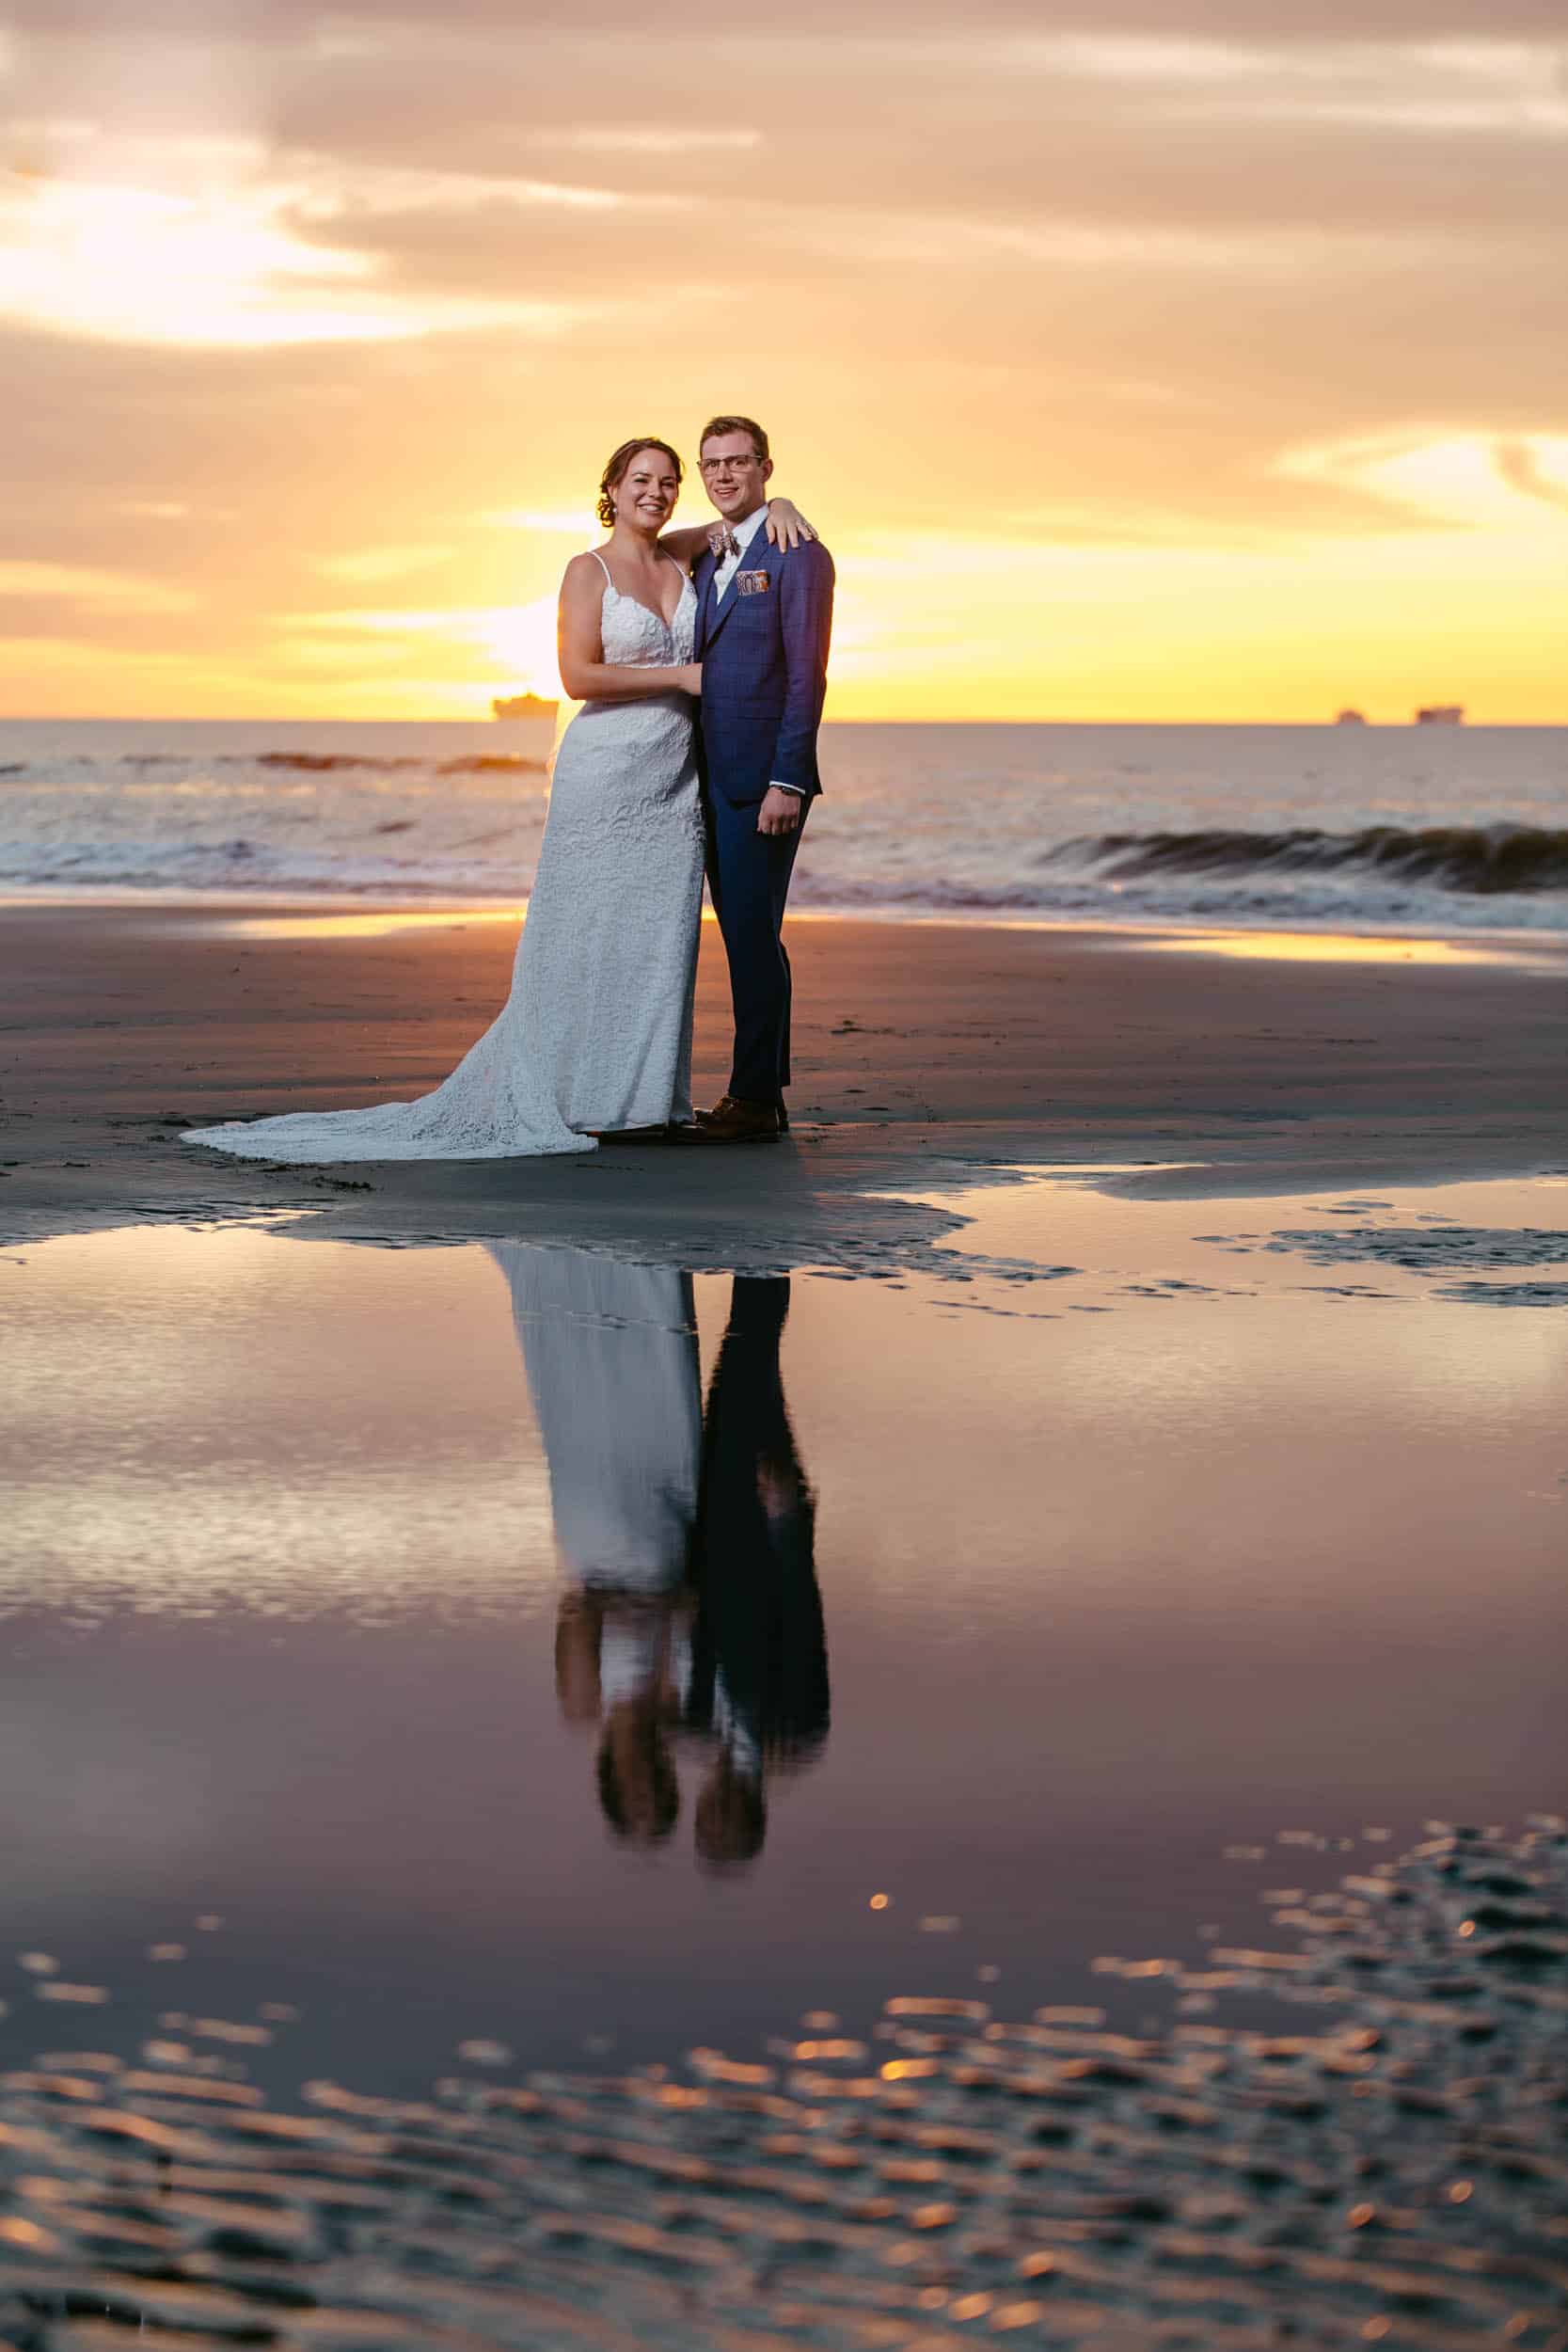 Nature elements captured as bride and groom say their vows at sunset on the sandy beach.